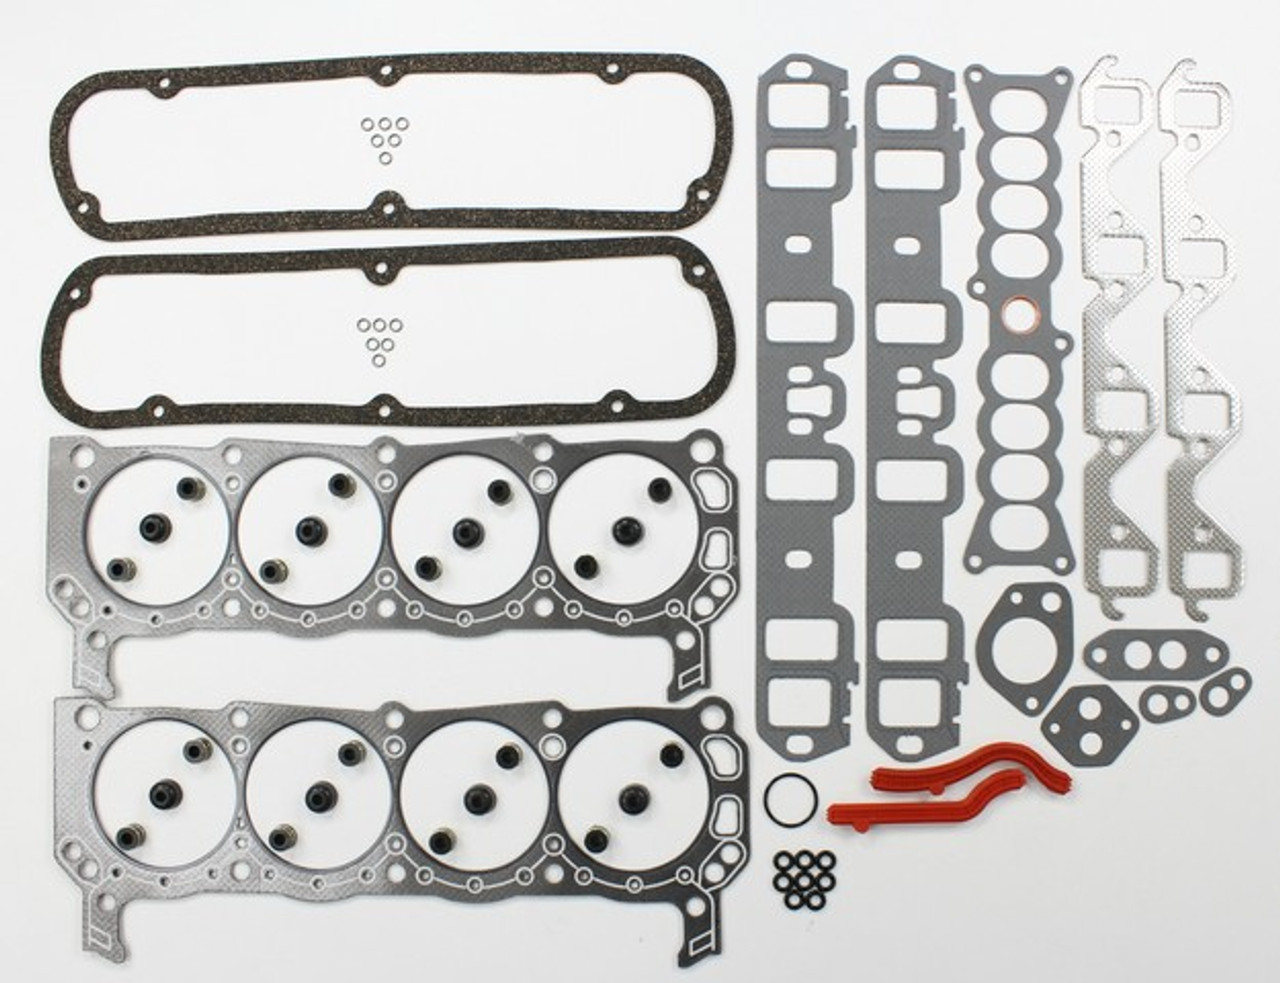 Head Gasket Set 5.0L 1990 Ford Mustang - HGS4104.14